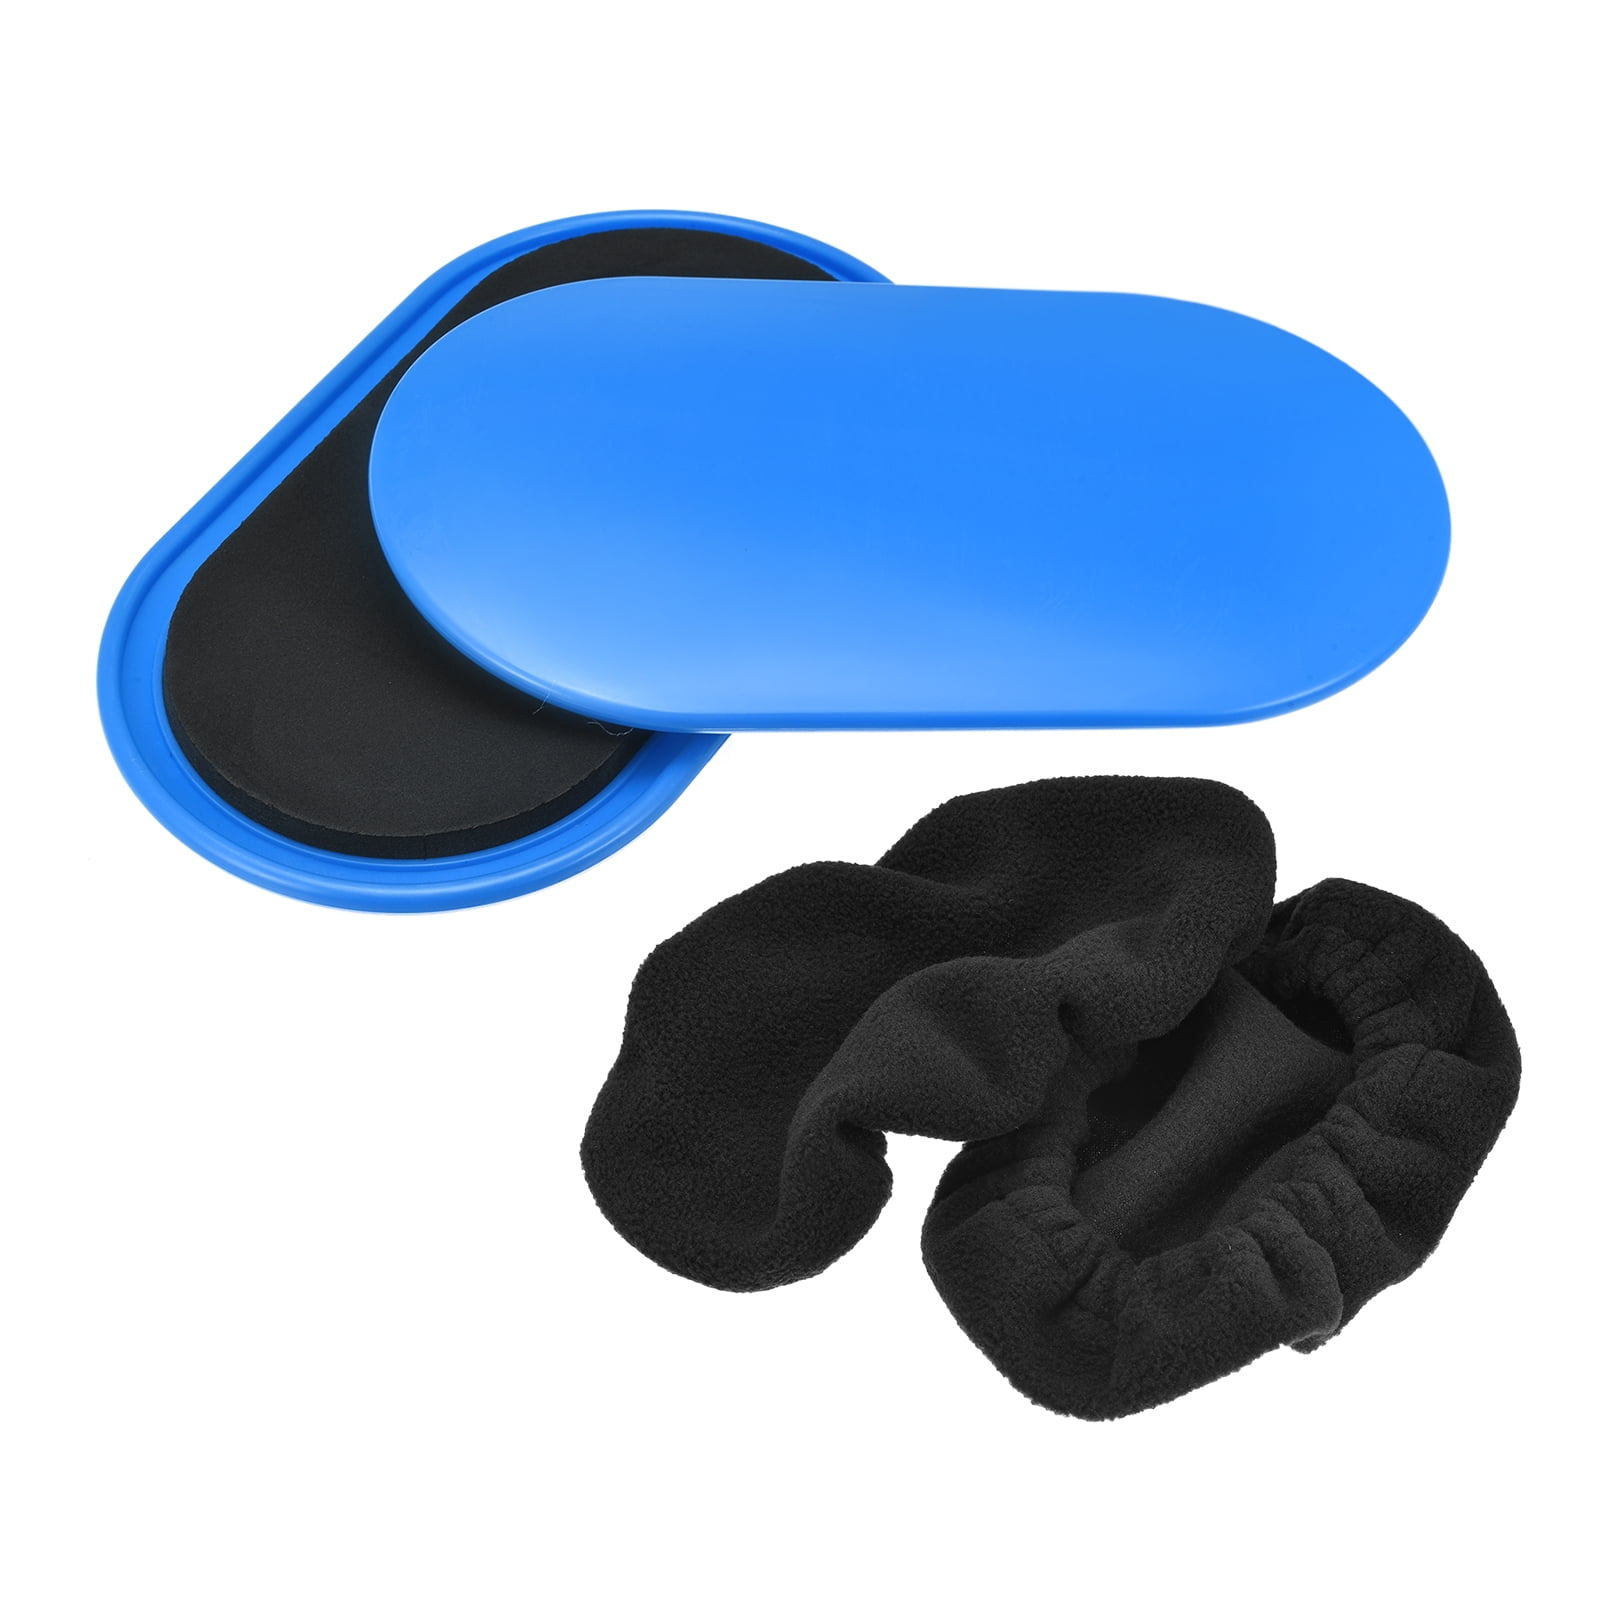 Uxcell Exercise Core Sliders, Oval Glider Discs with Feet Covers